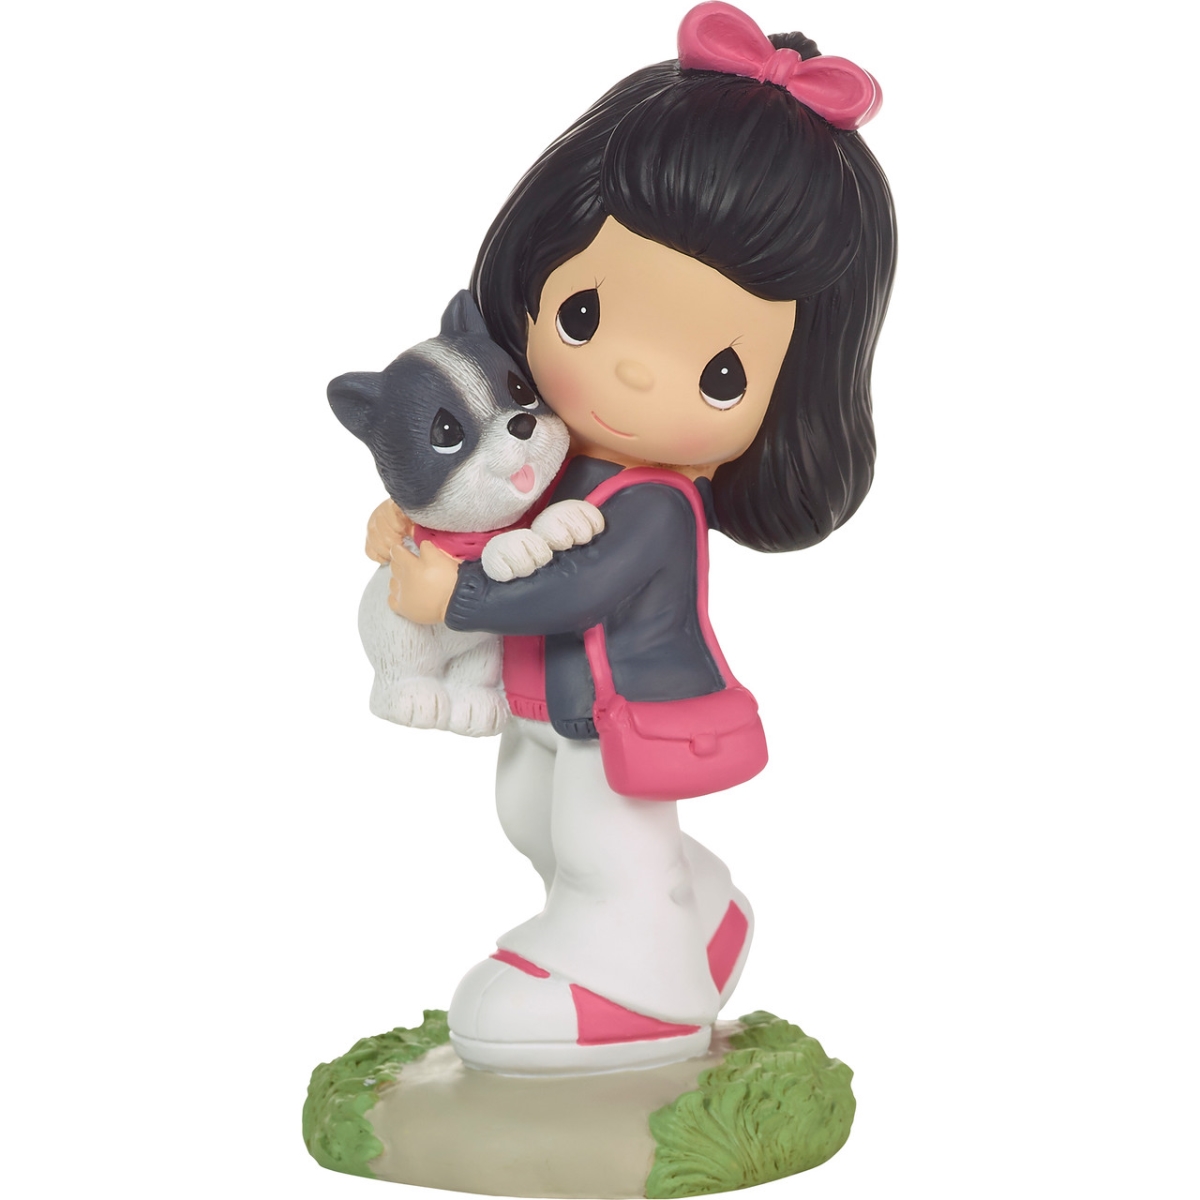 Picture of Be the Light Christian Bookstore 226402 5.5 in. Resin Girl Figurine with French Bulldog, Multi Color